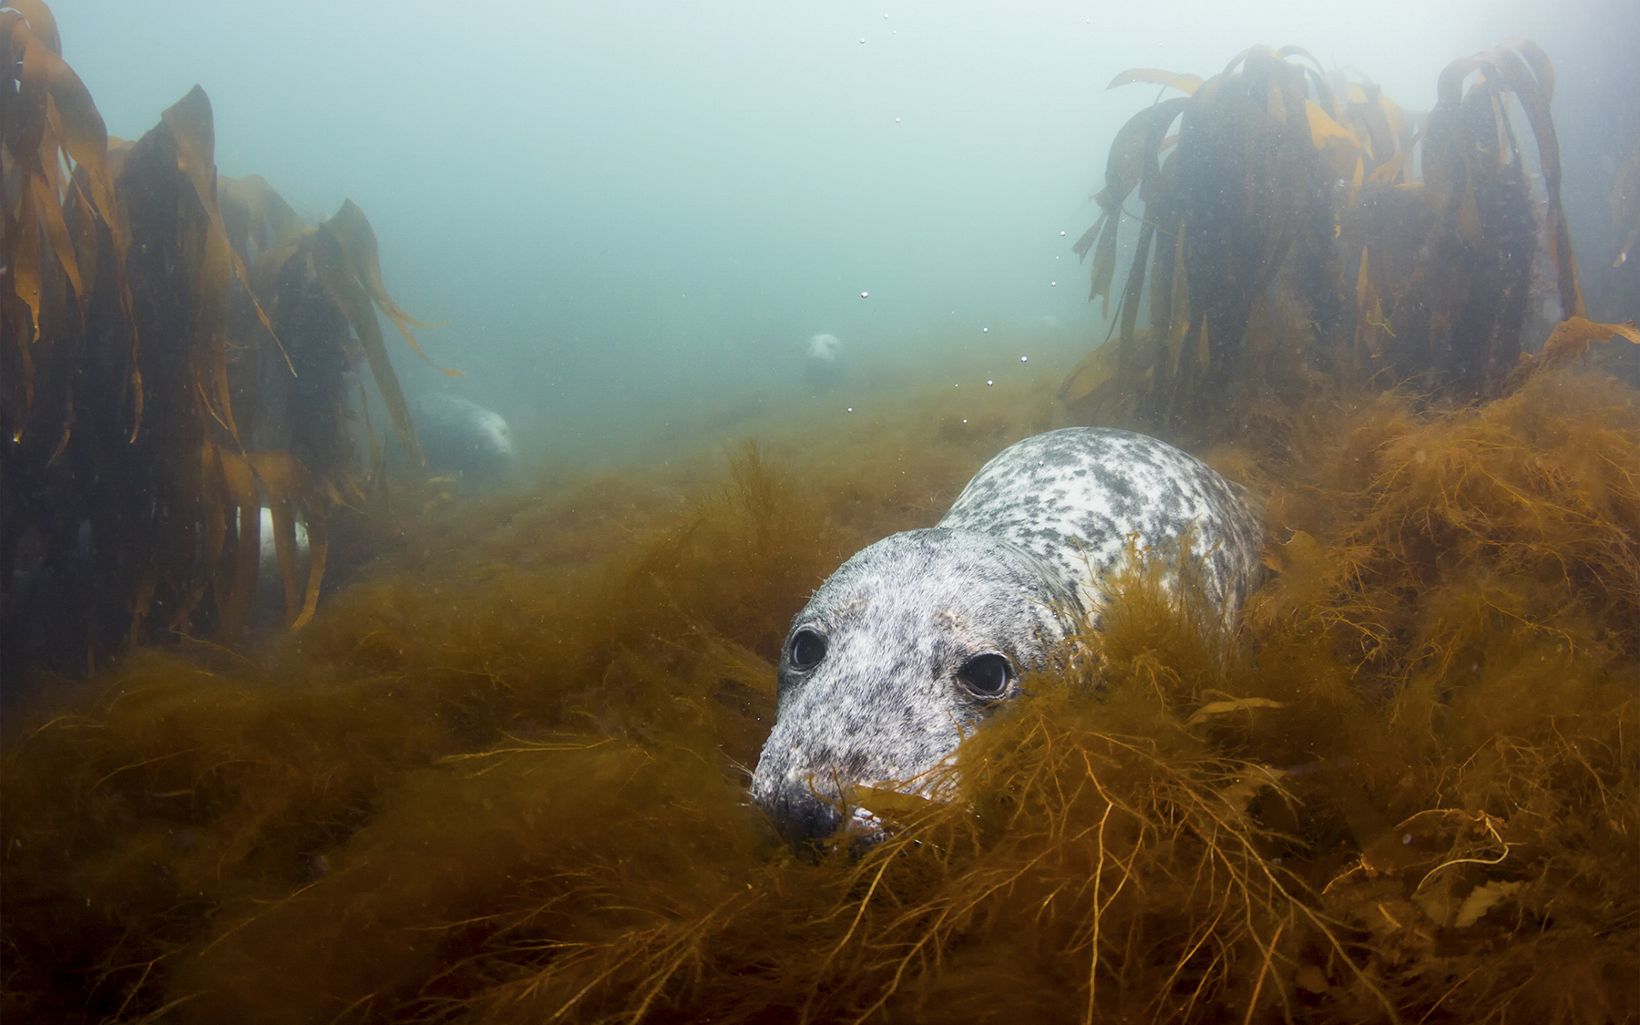 A group of grey seals get some rest in a soft bed of algae.